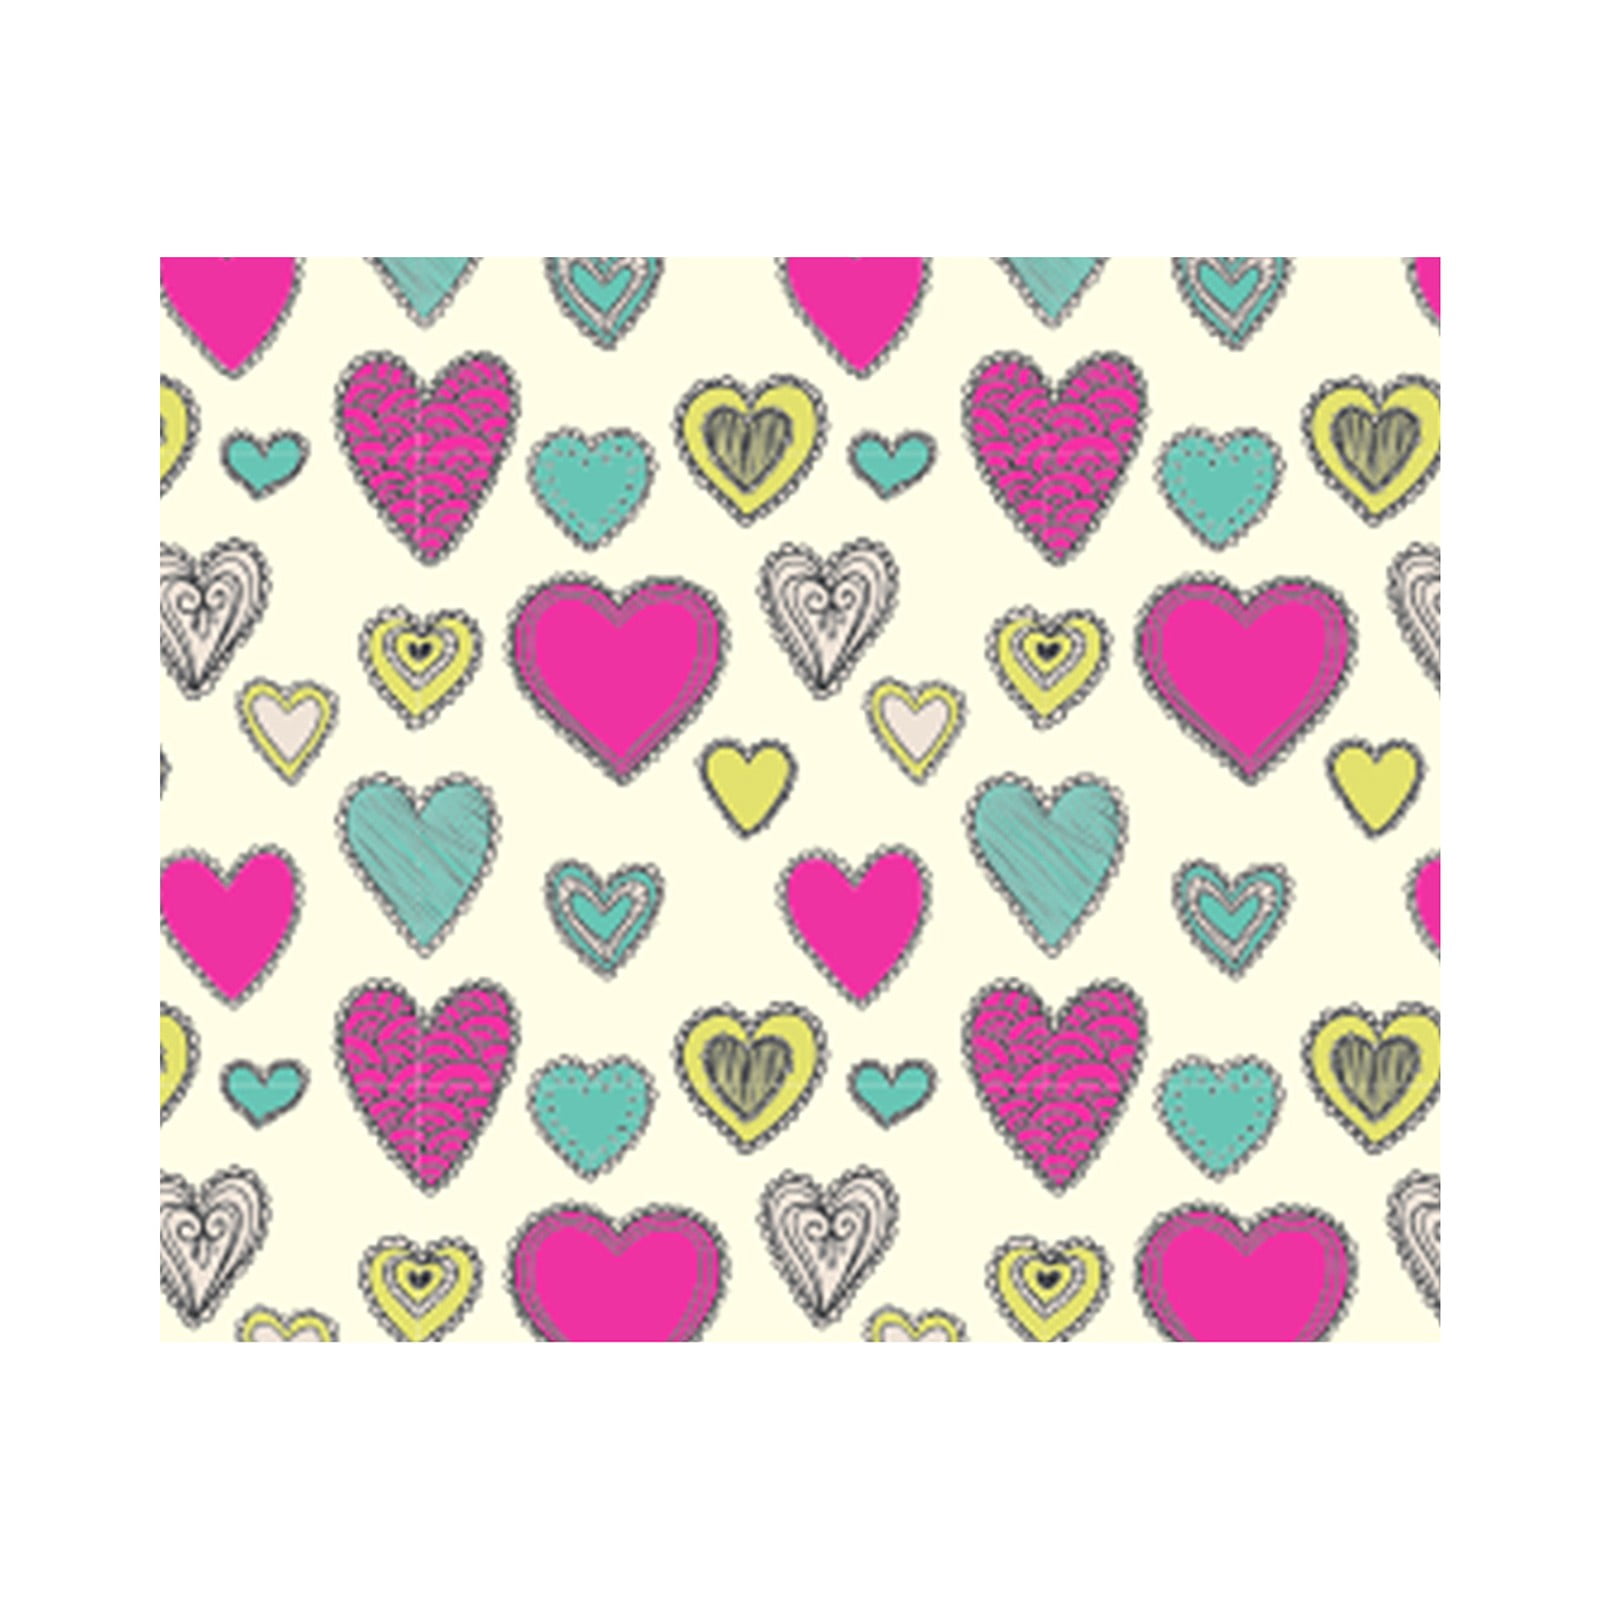 Gold Heart Mother's Day Gift Tissue Wrapping Paper SheetsRomantic Pink  Korean